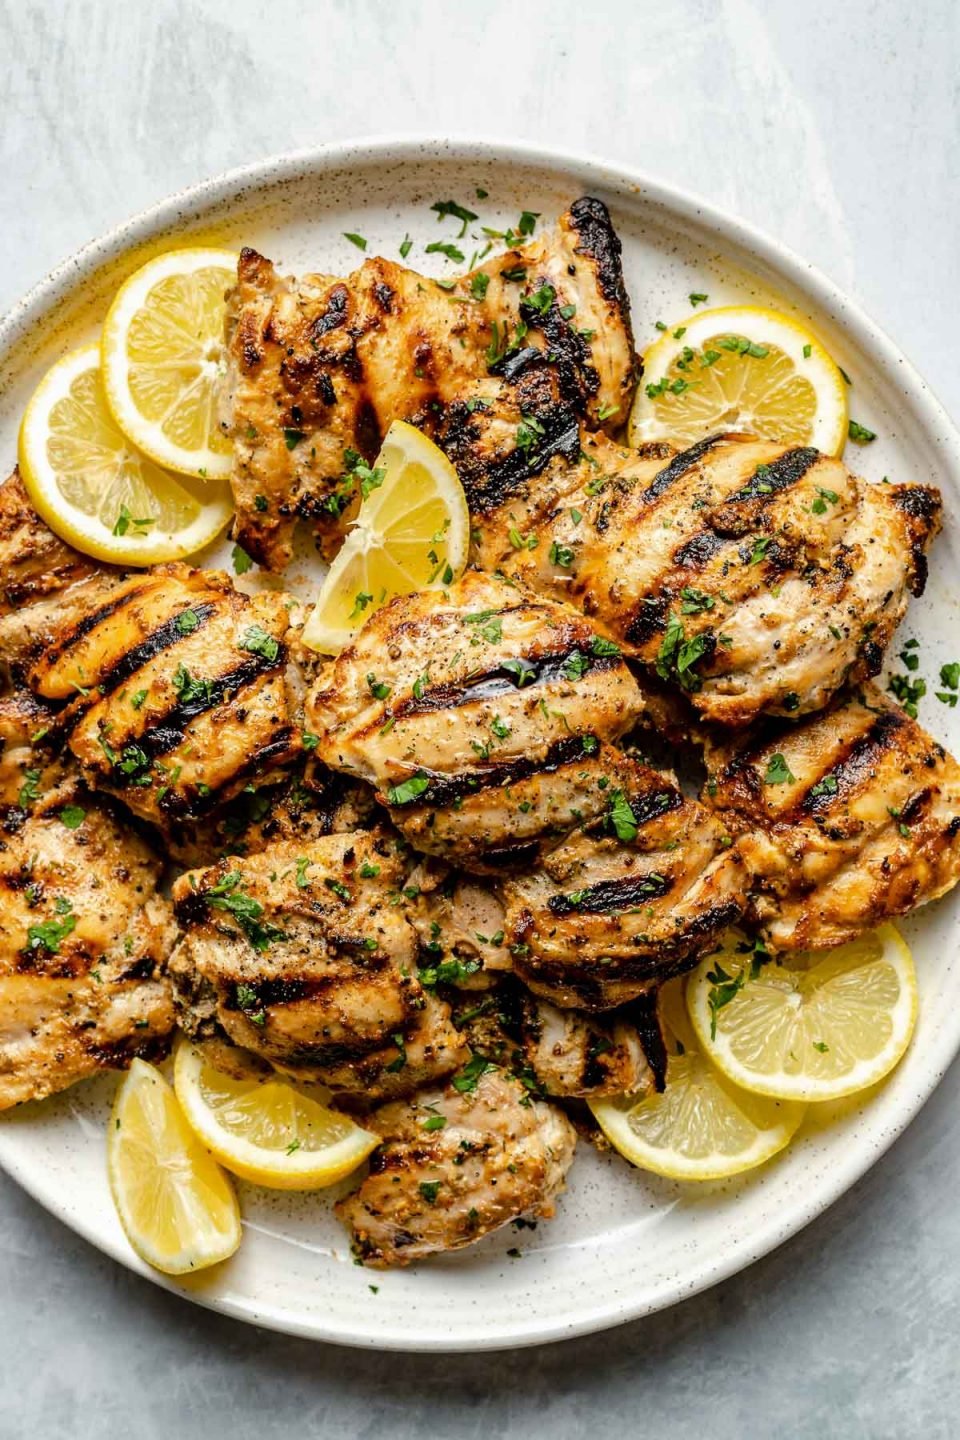 Grilled Greek chicken thighs shown on a white speckled plate atop a light blue surface. The chicken is garnished with fresh chopped herbs, lemon slices, & lemon wedges.